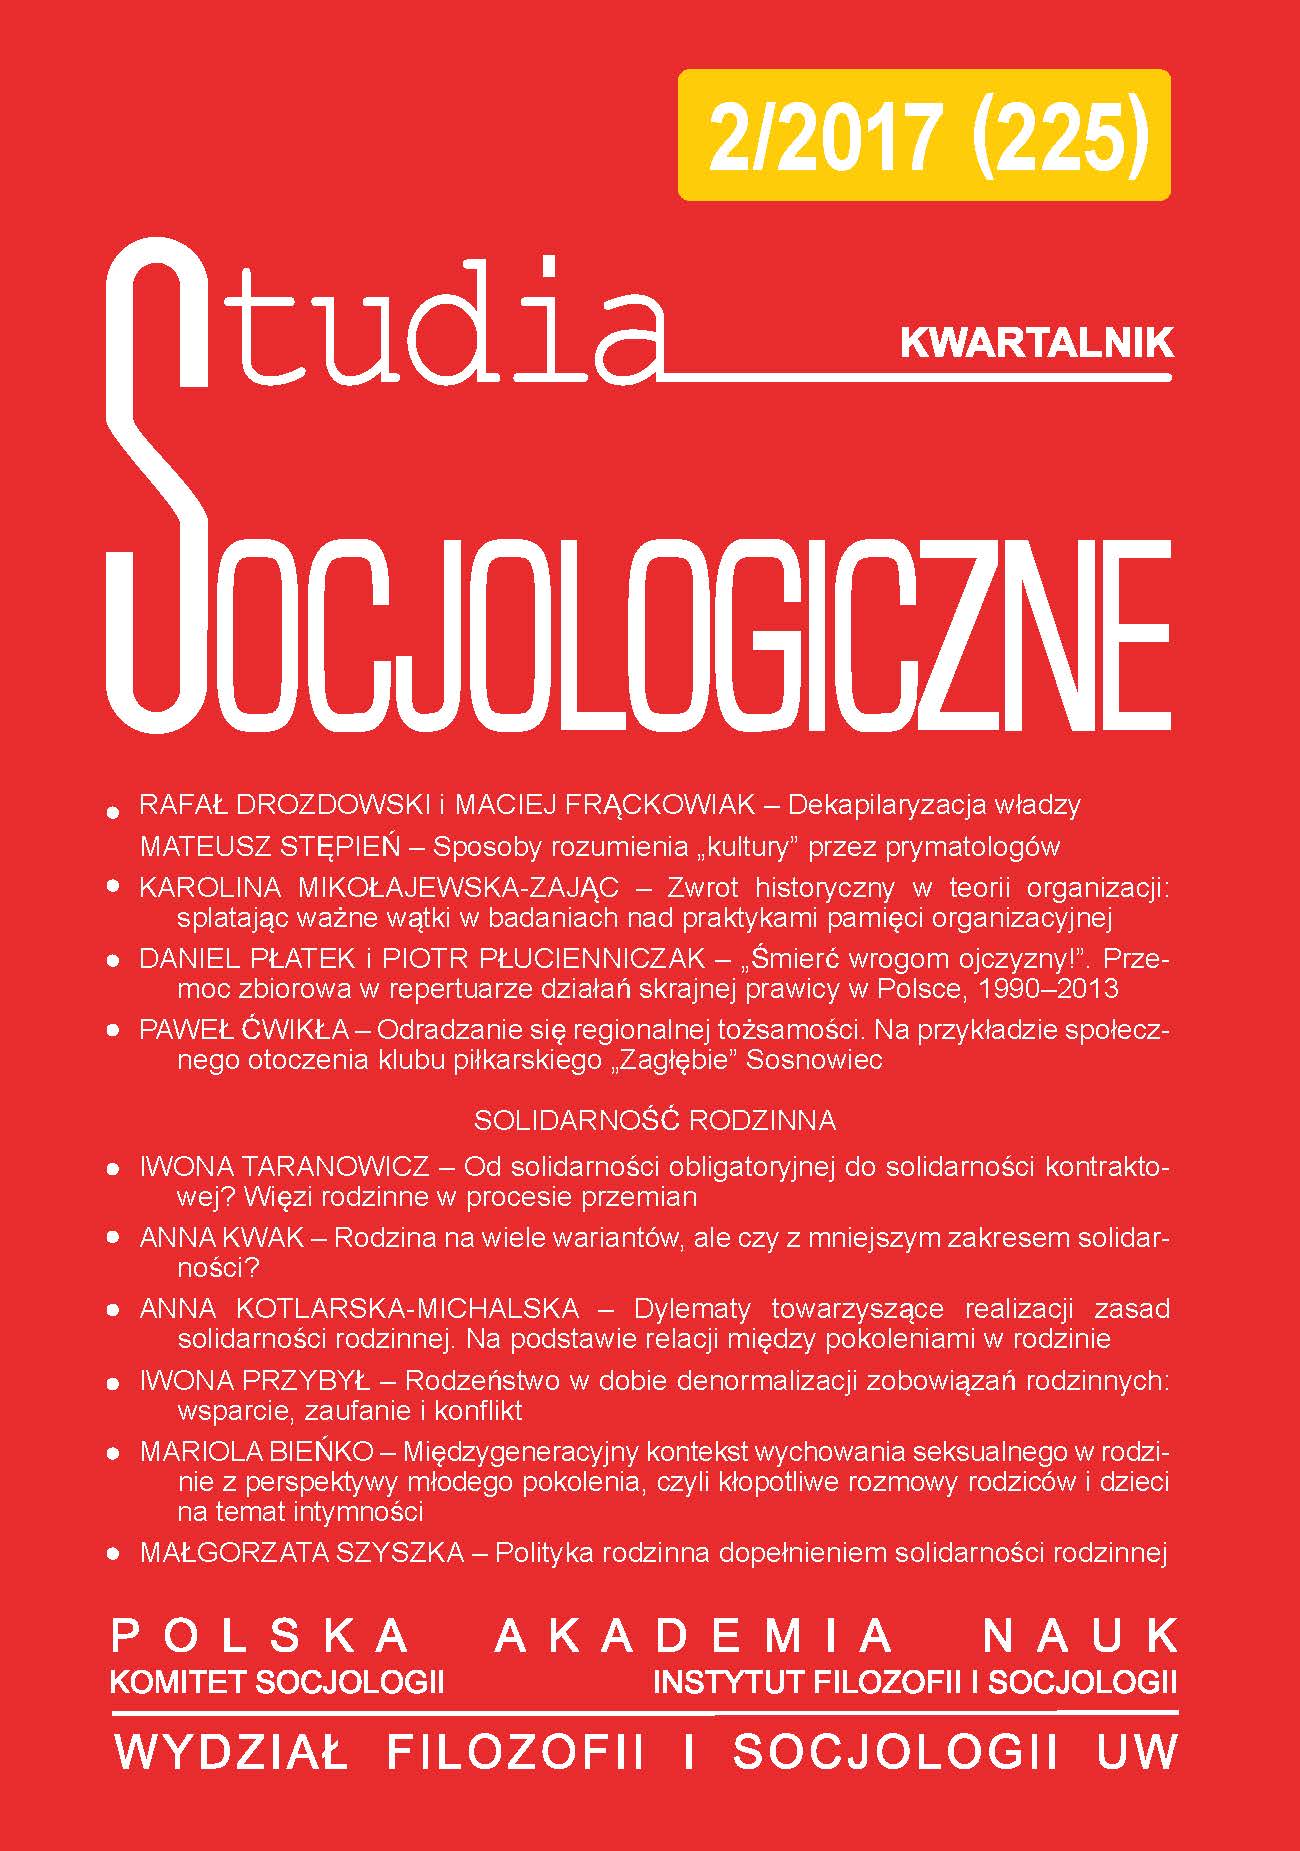 The Revival of Regional Identity: The Example of the Social Environment of the “Zagłębie” Sosnowiec Football Club Cover Image